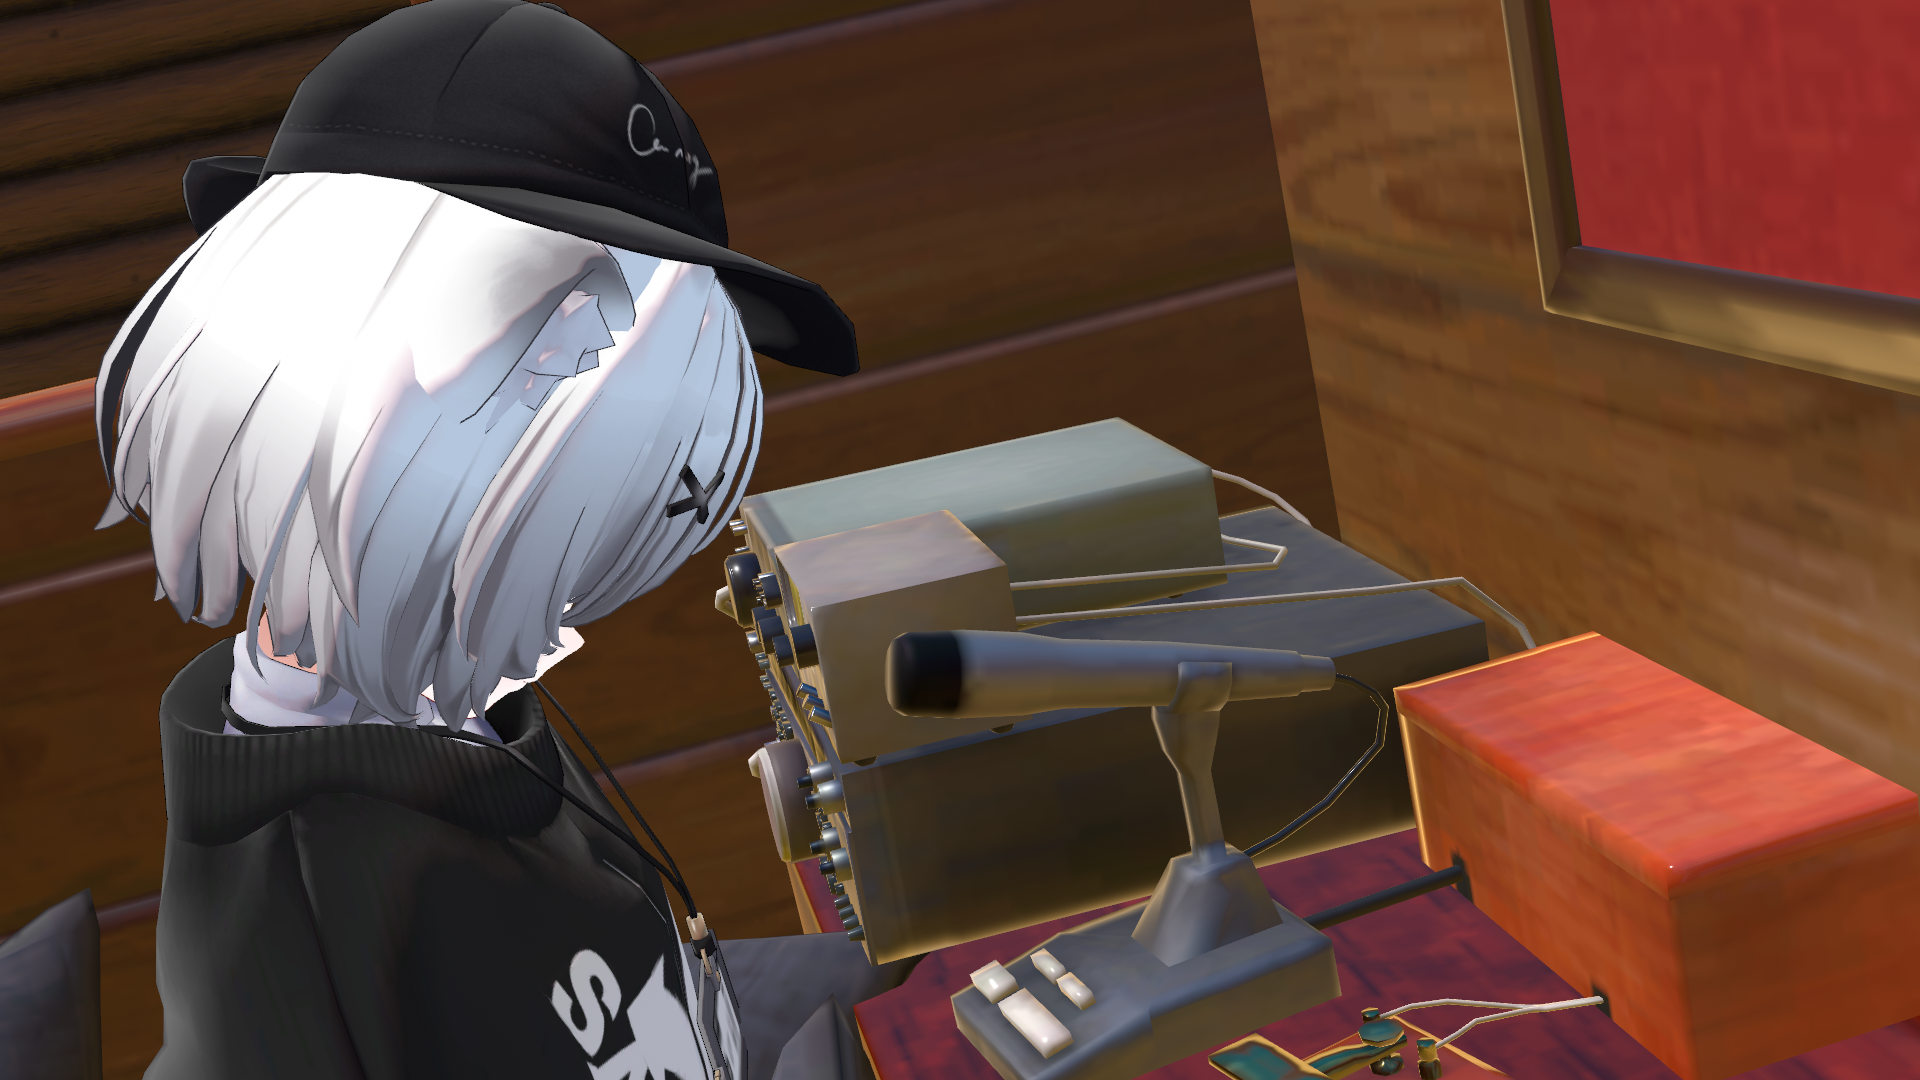 VRChat_1920x1080_2021-12-05_02-59-22.097.png